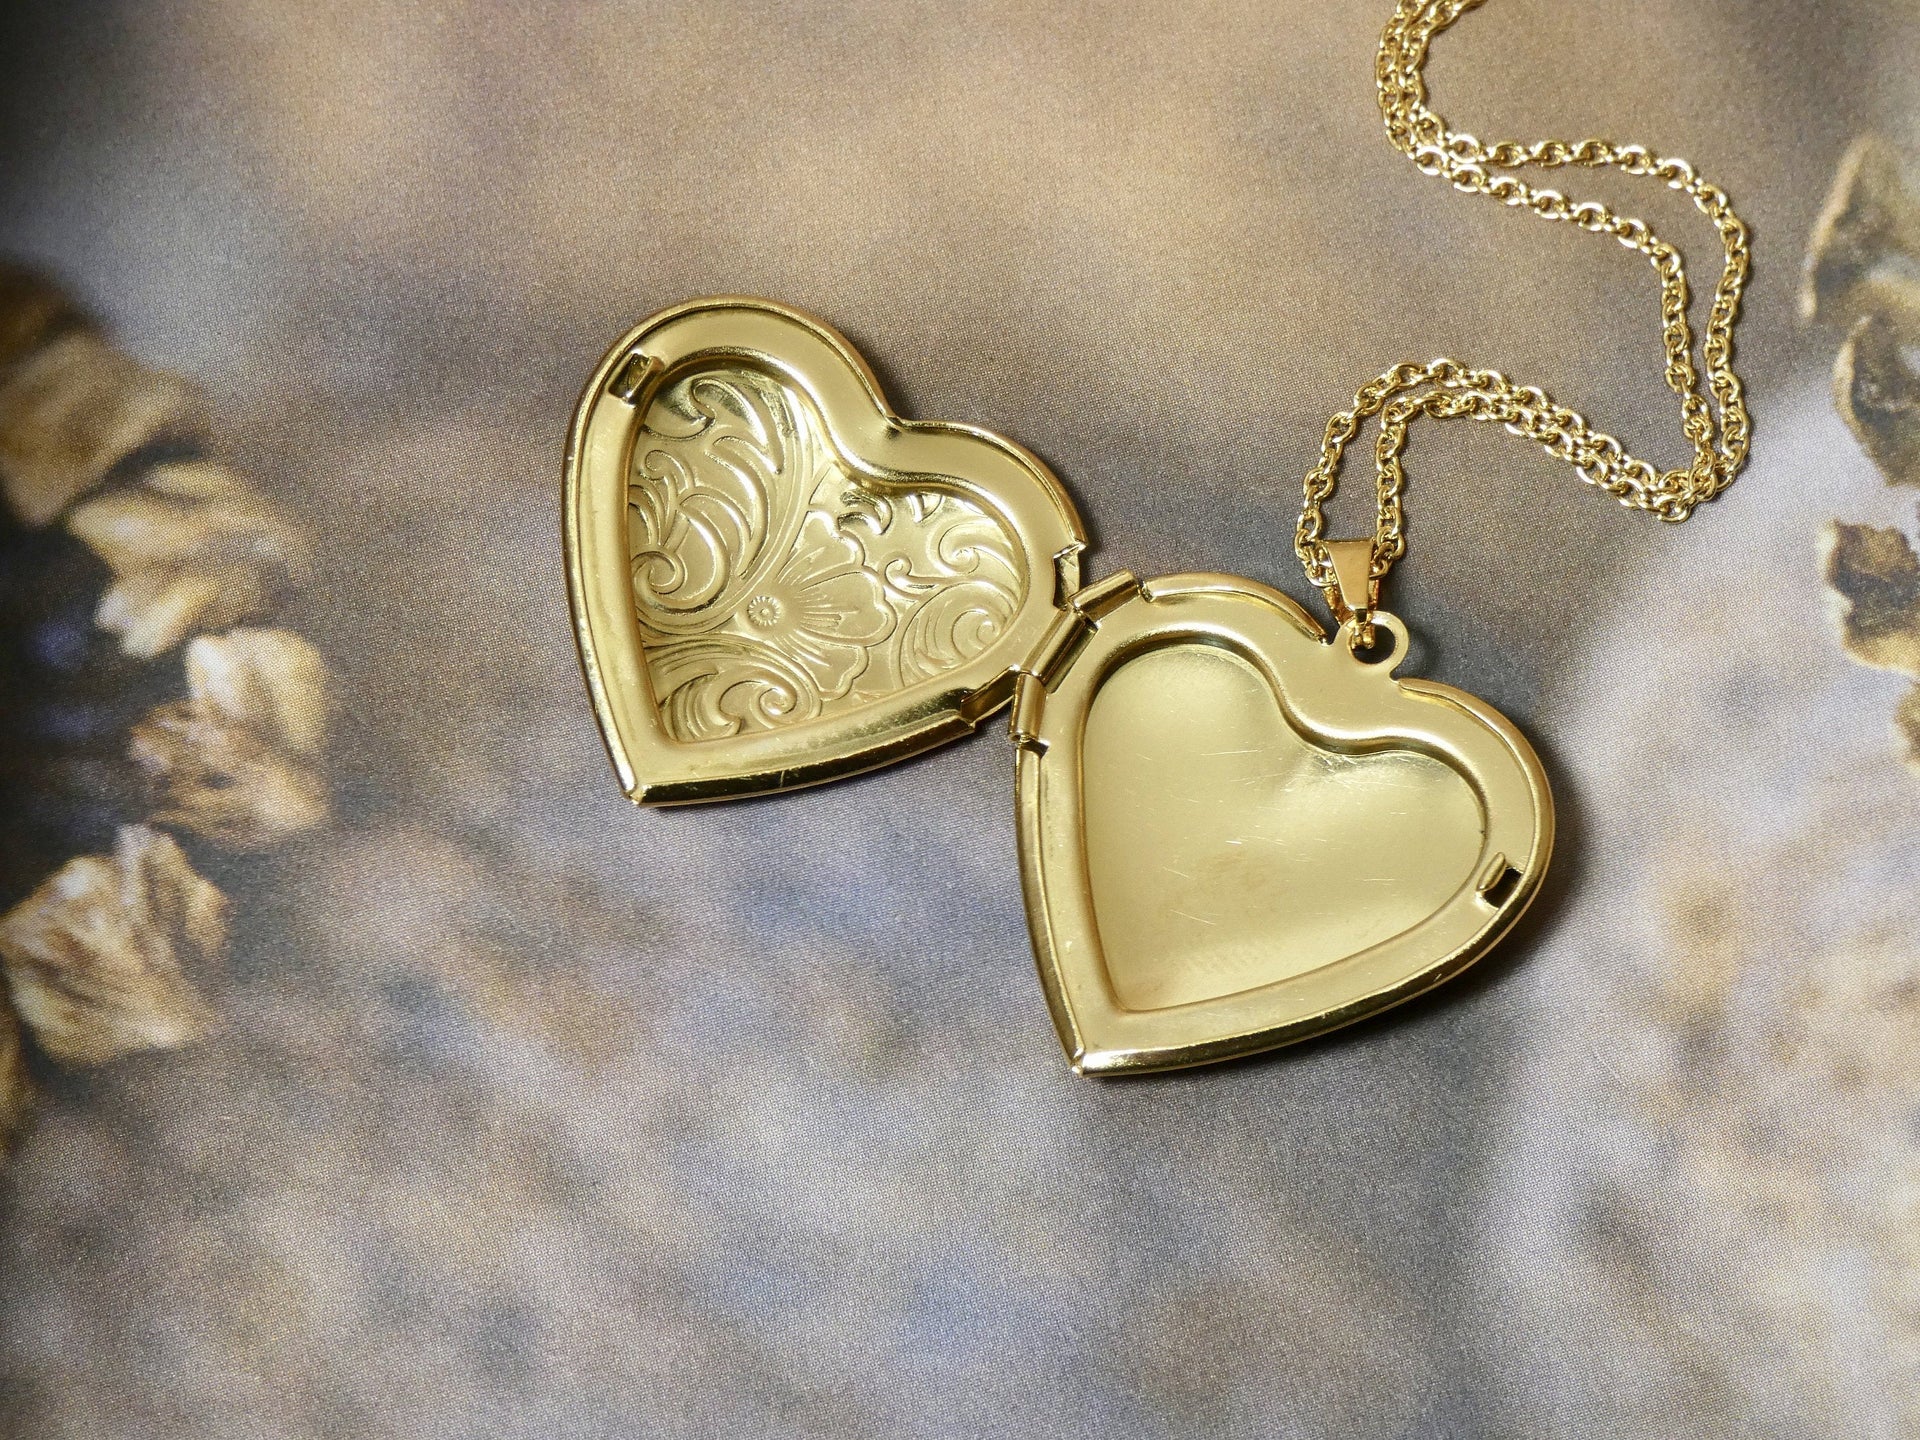 Heart Locket Necklace, Gold Swirl Pattern – Upcycled Works